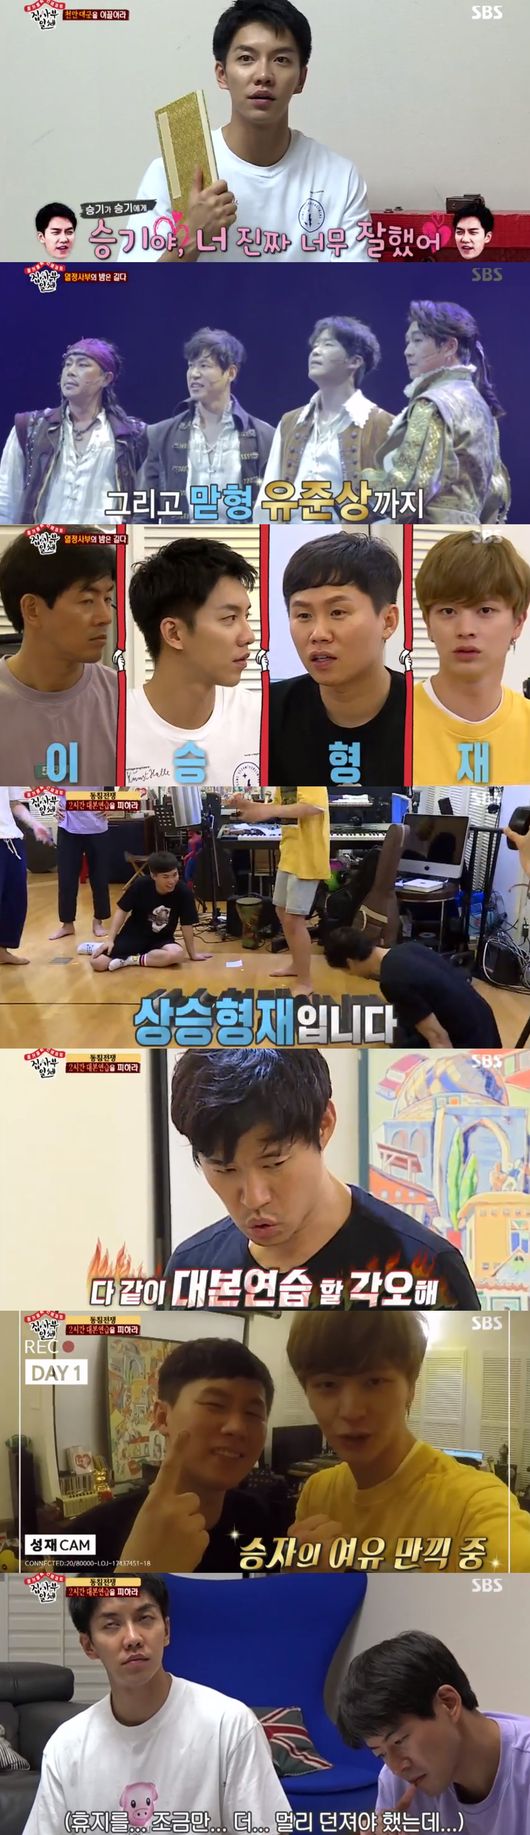 The All The Butlers rise and fall have faced off with the Um Yu-min Act.On SBS Good Sunday - All The Butlers on the 12th, Lee Sang-yoon, Lee Seung-gi, Yang Se-hyeong and Yook Sungjae finished the master Yoo Jun-sang and hard Haru.The members who did a lot of things in Haru with reversal class were tired.But the passion master was different: he finished Haru with calligraphy and ink painting he had learned from film shooting.All The Butlers members also wrote their own Haru feeling by grabbing food and holding a brush.Lee Seung-gi admired himself, saying, The ink painting genius was born.His work depicts Yoo Jun-sangs nickname, Showman, as mountains, rivers, trees, houses, and fields. Yoo Jun-sang and members also praised Lee Seung-gis self-praise and praised the sense.Lee Seung-gi, who was praised by everyone, said, This is the most joyful moment in All The Butlers appearance.I have to do it with a profile photo. Even if I boasted, I was recognized as this time.Lee Sang-yoon wrote, Haru, which was hard today, will also turn the stage, and I will truly go crazy.Yook Sungjae was praised for writing better than the master with a message that I want to eat Chimak written as a stream of consciousness along with a wonderful candle painting.Yang Se-hyeong painted a tree full of flowershelves and said, My master is too big to contain all the trees.Yoo Jun-sang was thrilled with the pictures and messages of four people, and the members also took pictures of the works and expressed their desire to possess them.The members of All The Butlers, who have been in contact for 200 days, have also created team slogans like the Um Yu-min Act, which has become a rising figure after four members.The members showed off their strong (?) fraternity, giving the meaning brothers who step on each other and rise.Finally, bedtime. The members started a game of 10 elephant noses and a tissue paper to pick a member to sleep with Yoo Jun-sang.The sleeping party can sleep at 3 am after two hours of script practice with Yoo Jun-sang, so the members have more teeth.Starting with Lee Sang-yoon, all of the members came to Game with too much seriousness; Yang Se-hyeong was the last-most likely but made a reset by catching a falling tissue.As a result, Yook Sungjae and Yang Se-hyeong won and Lee Seung-gi and Lee Sang-yoon, who threw tissue closer than Yoo Jun-sang, were penalized for sleeping.In fact, Yoo Jun-sang, Lee Seung-gi, and Lee Sang-yoon burned the dawn by practicing musical scripts until after 3 am.The passion master, Yoo Jun-sang, did not sleep and poured out his love for his work, and they prepared the tenth anniversary event of the Eom Yu-min law.The following day, the Um Yu-min law tenth anniversary commemorative event prepared by Yoo Jun-sang and All The Butlers members was held.Um Ki-joon, Yoo Jun-sang, Min Young-ki and Kim Beop-rae have been on the same musical stage for 10 years and have been enjoying a strong friendship.The eldest brother, Yoo Jun-sang, organized an event to celebrate this, and Kim Beop-rae, Min Young-ki and Um Ki-joon laughed broadly, even taking group photos in front of ice sculptures.Kim Beop-rae praised Yoo Jun-sang for as always, I tried a lot seriously.But there was a twist: Um Ki-joon revealed: Its not tenth anniversary, its our nine-year car, my brother did the wrong calculations.All The Butlers members pinpointed, Is everything about Master Yoo Jun-sangs mistake? Its a tenth anniversary memorial show forcibly.However, Yoo Jun-sang was amused by even flowering and flowering; in his opening remarks, he said, It was the first day of the Three Musketeers performance on May 12, 2009, 10 years.I am grateful that I was able to spend those times on stage. It was meaningful and beautiful because I was with good friends. It was beautiful and young. The masters ambitious performance was a celebration.Kim Beop-rae, Um Ki-joon, Min Young-ki wanted a girl group such as Black Pink and Suzie, but Yoo Jun-sang prepared the We Are One celebration performance of the main characters of the law.The four completed a wonderful harmony with fantastic breathing.The main event was a decibel measurement game: All The Butlers members shouted up, up and up, up and up and they were 84 decibels.The members of the Umyu Civil Law were confident of the tenth anniversary friendship, but they shot 84 decibels equally.The final game was a game: all of the teas that were 10 times more than the sorghum tea were drunk quickly with straws.On the other hand, Jin Sang-hyungs team proved a thin (?) friendship by driving the remaining Sotae tea to his youngest.Next year is the real tenth anniversary - please dont call me, said Um Ki-joon, who was scolded throughout the event.Lee Sang-yoon also said, Lets build up friendship for a long time like the Um Yoo-min law.All The Butlers